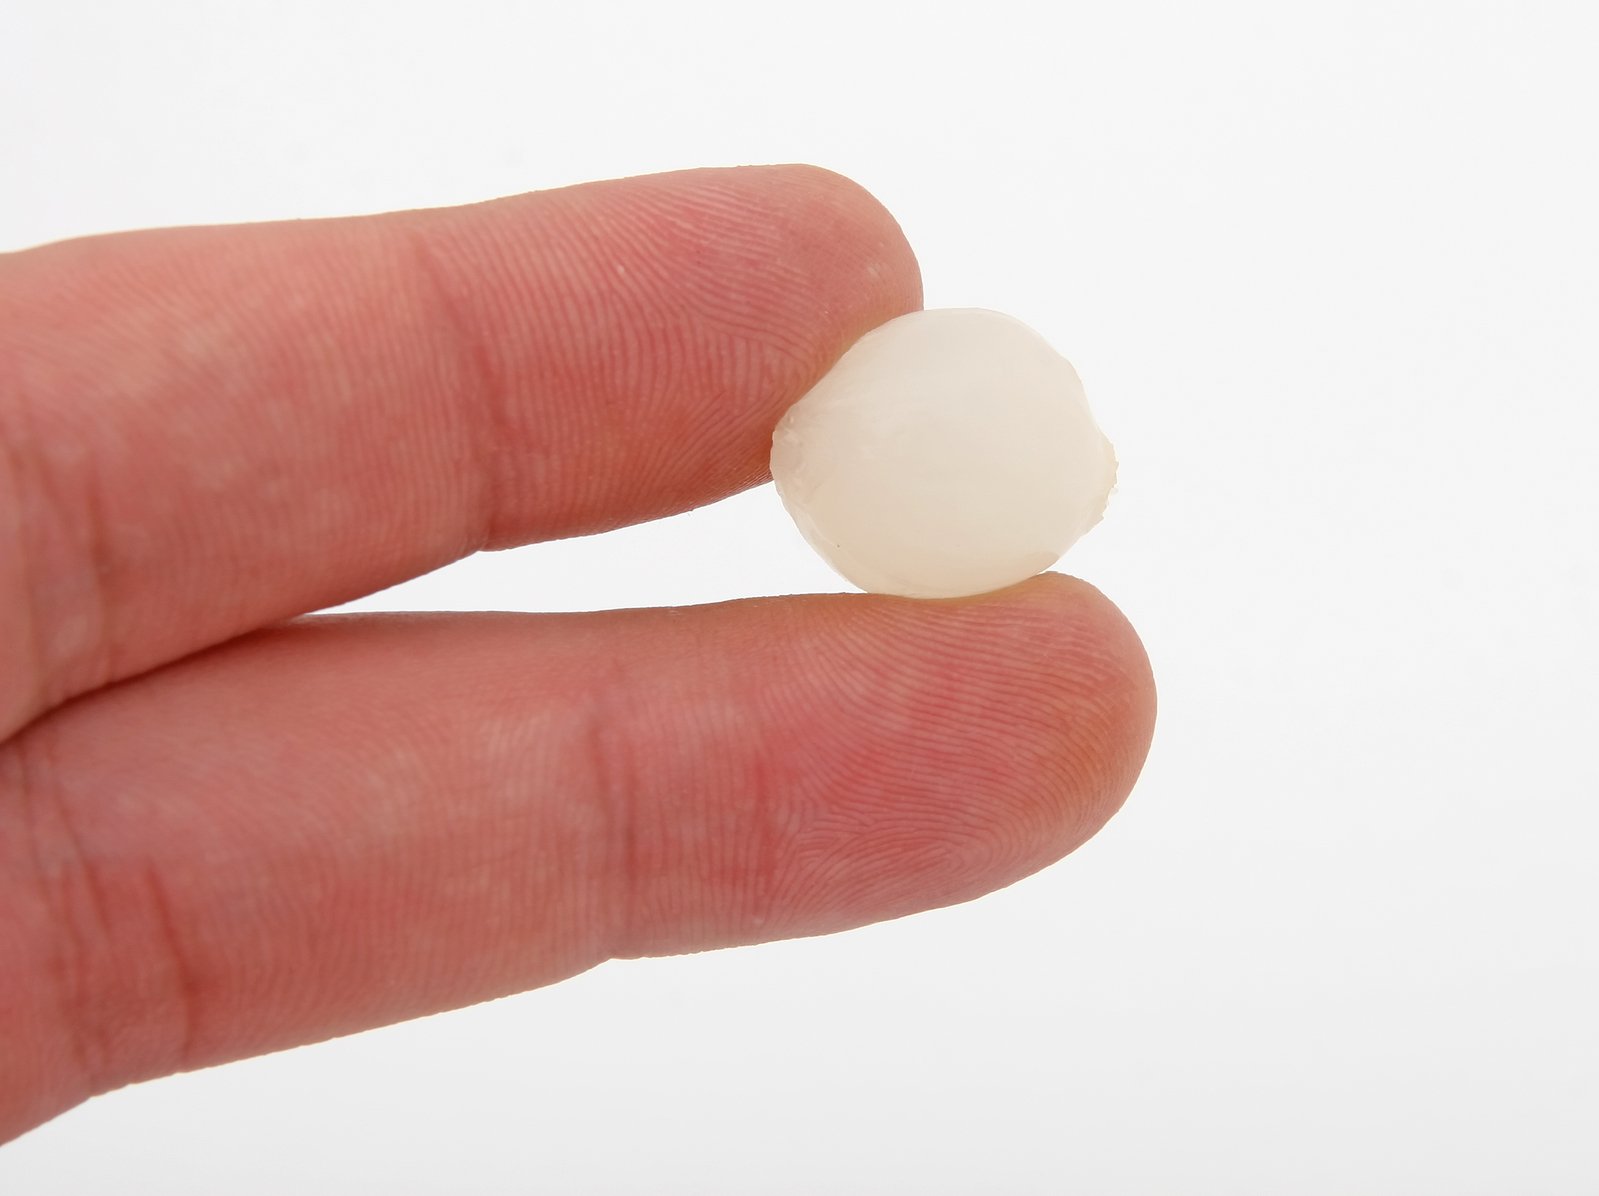 a small ball of white stuff being held by someone's hand